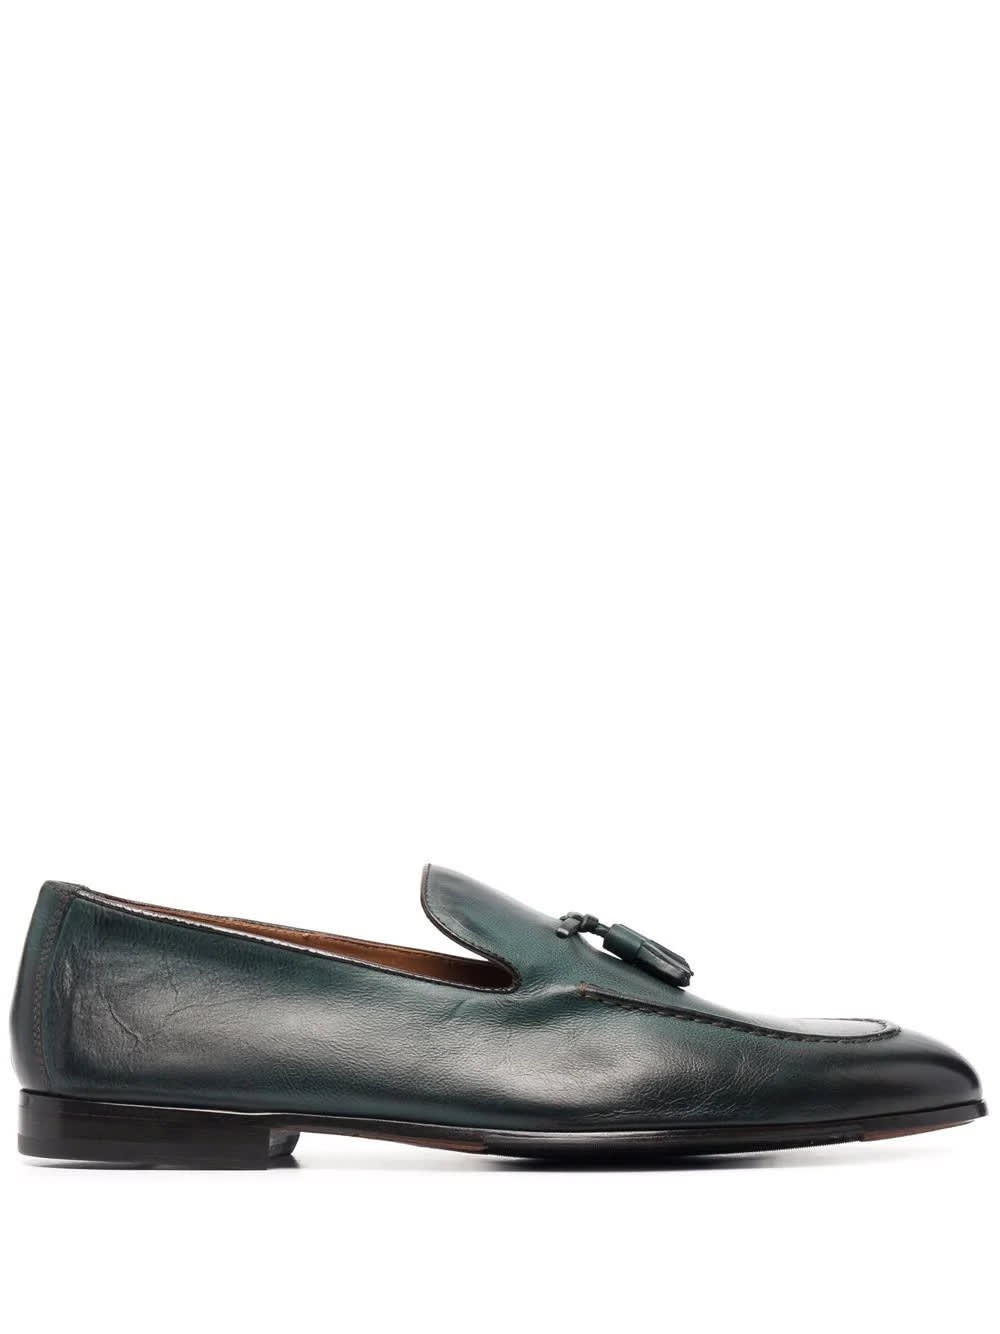 Doucals Man Loafer With Tassels In Green Smooth Leather